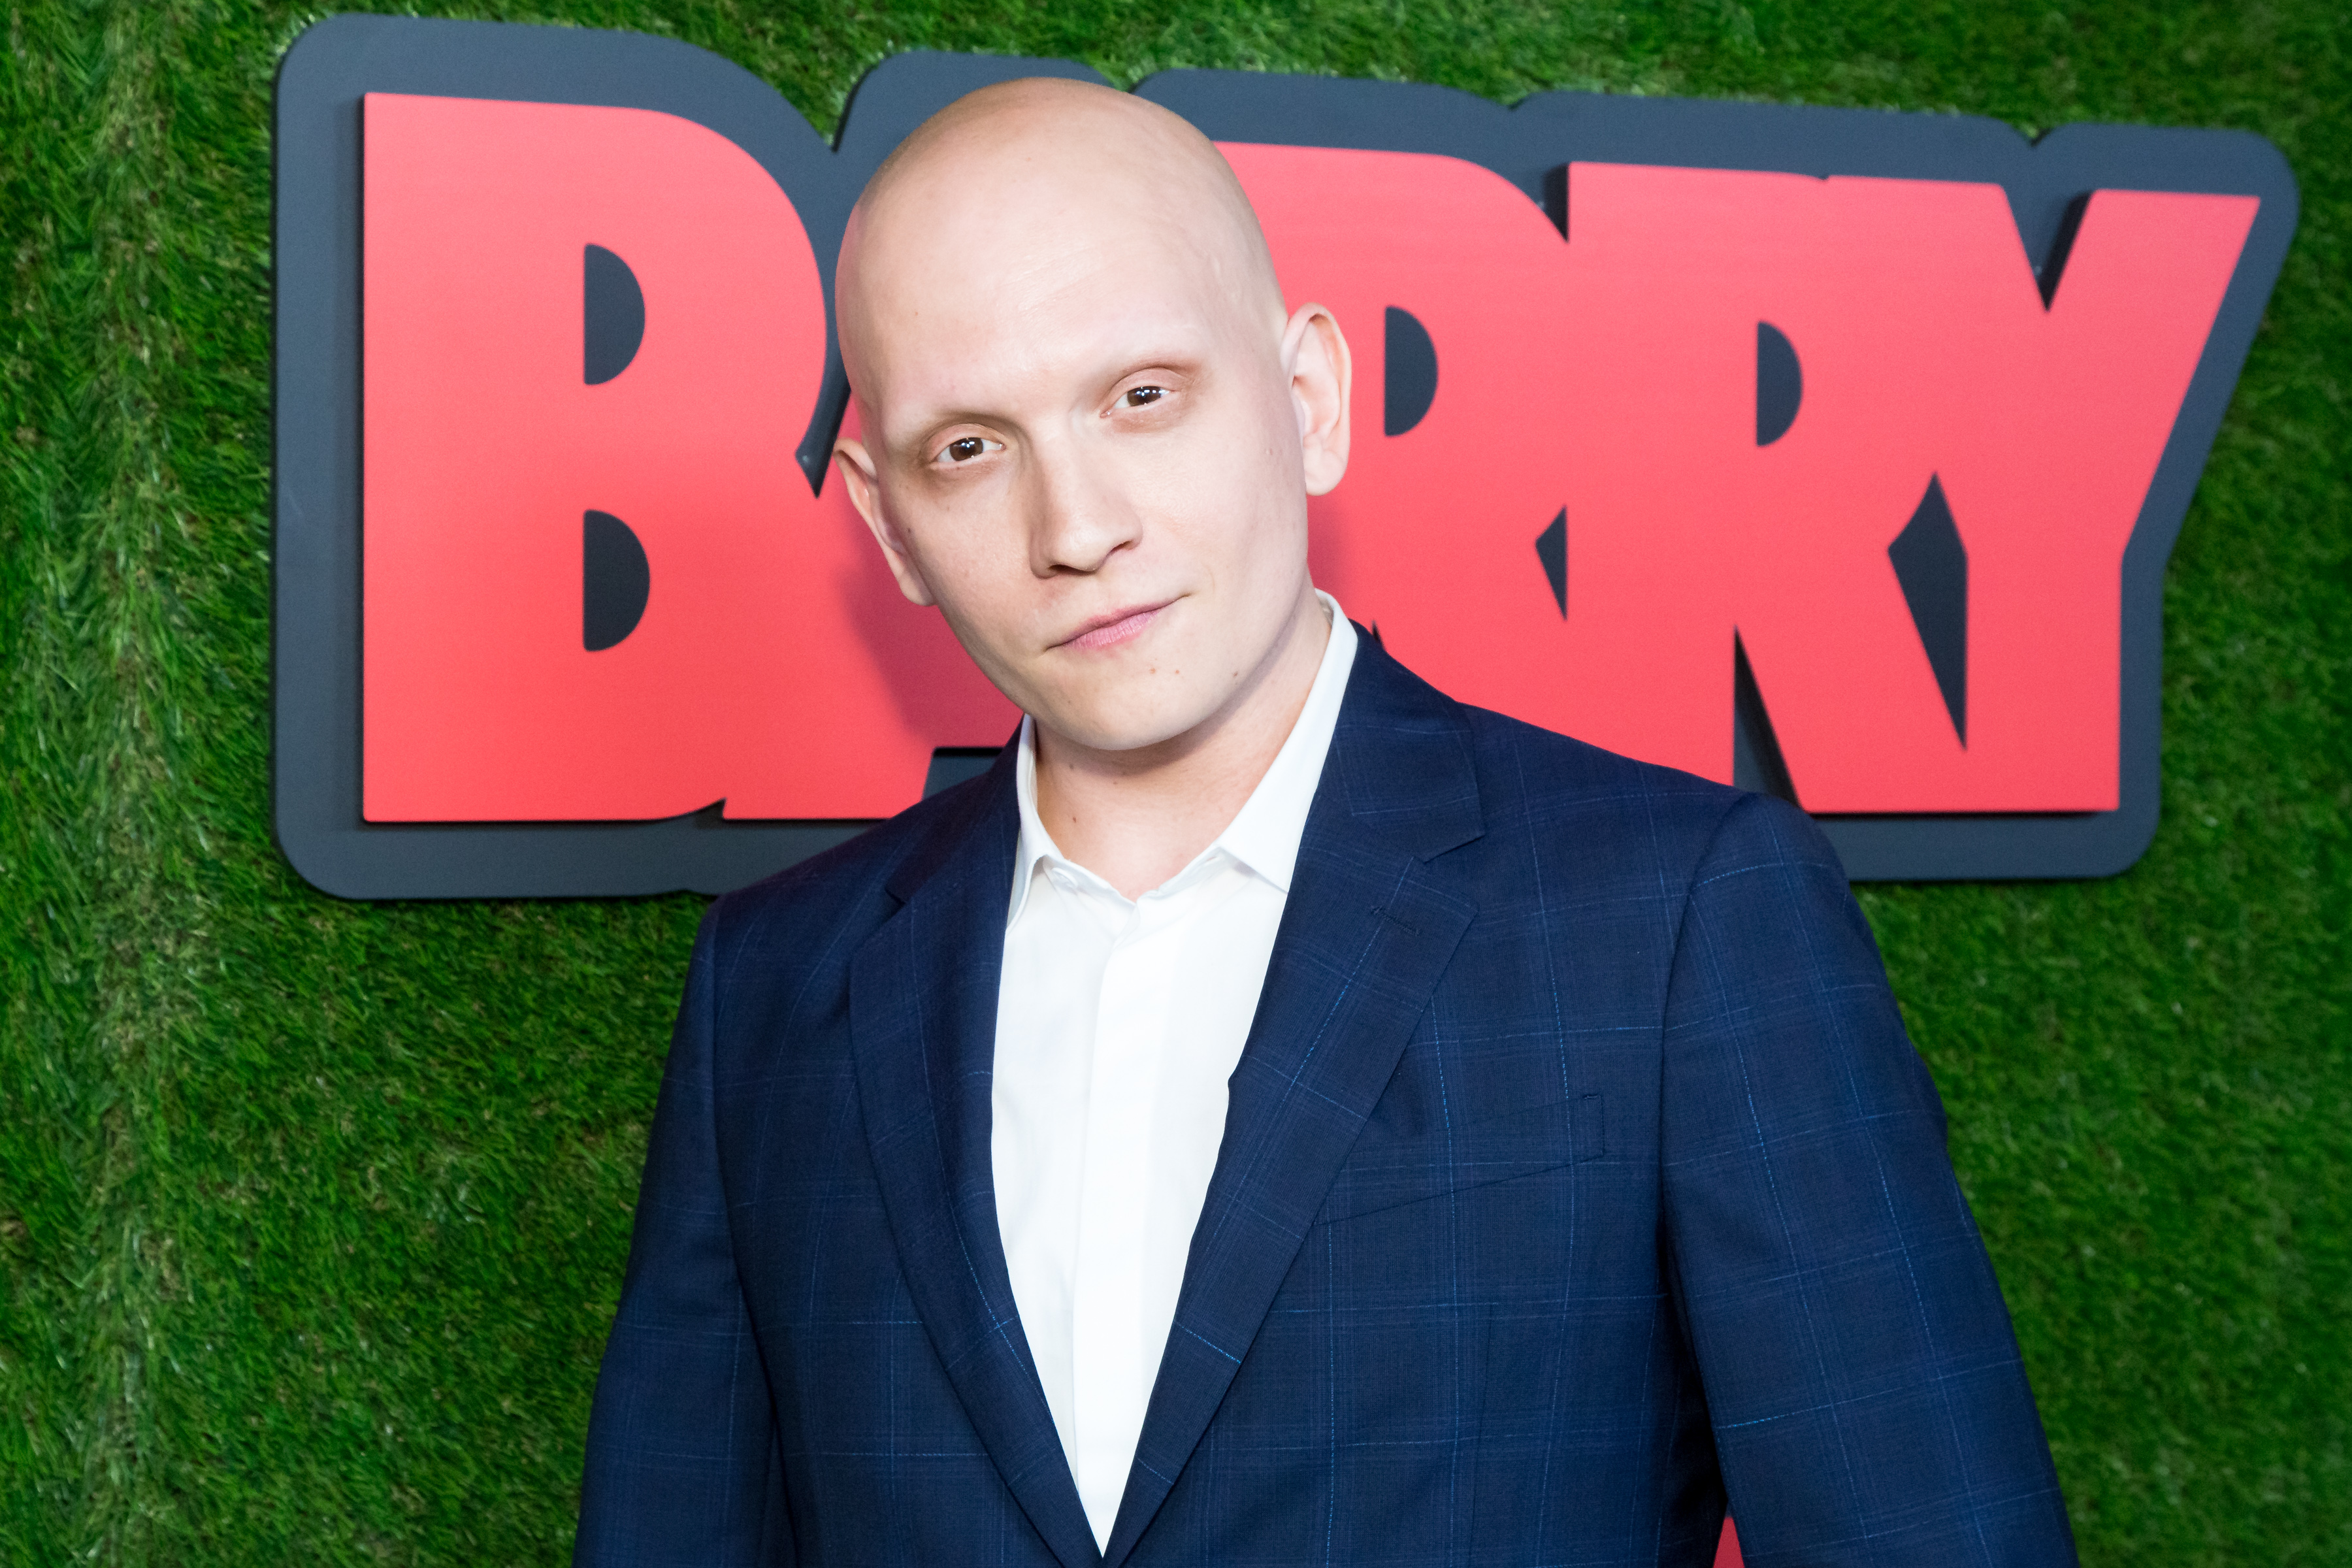 UPROXX 20 Interview: Anthony Carrigan Of HBO's 'Barry'